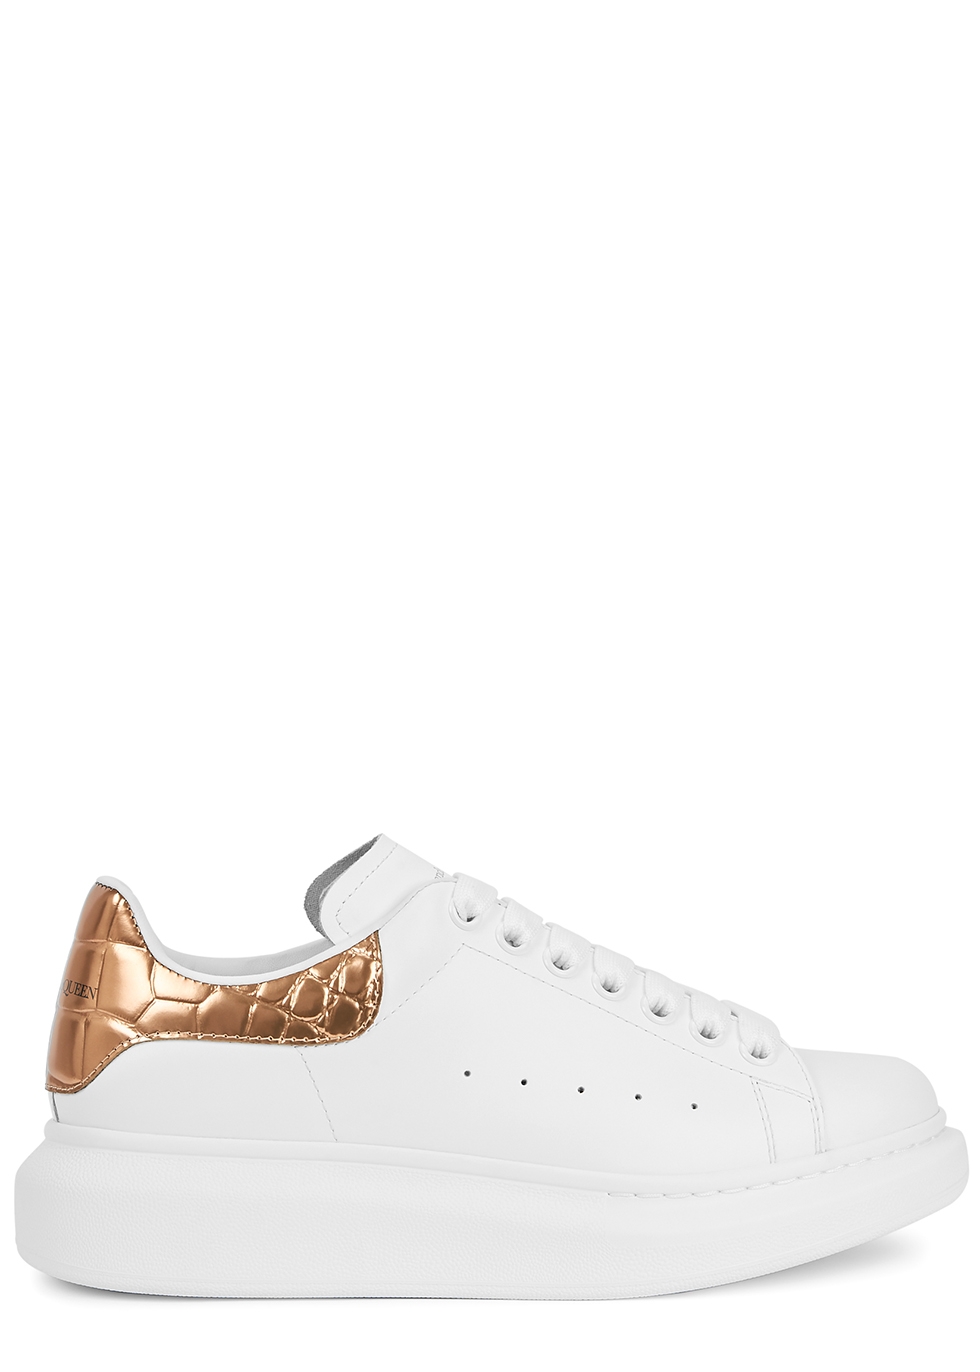 Alexander McQueen Larry white leather 